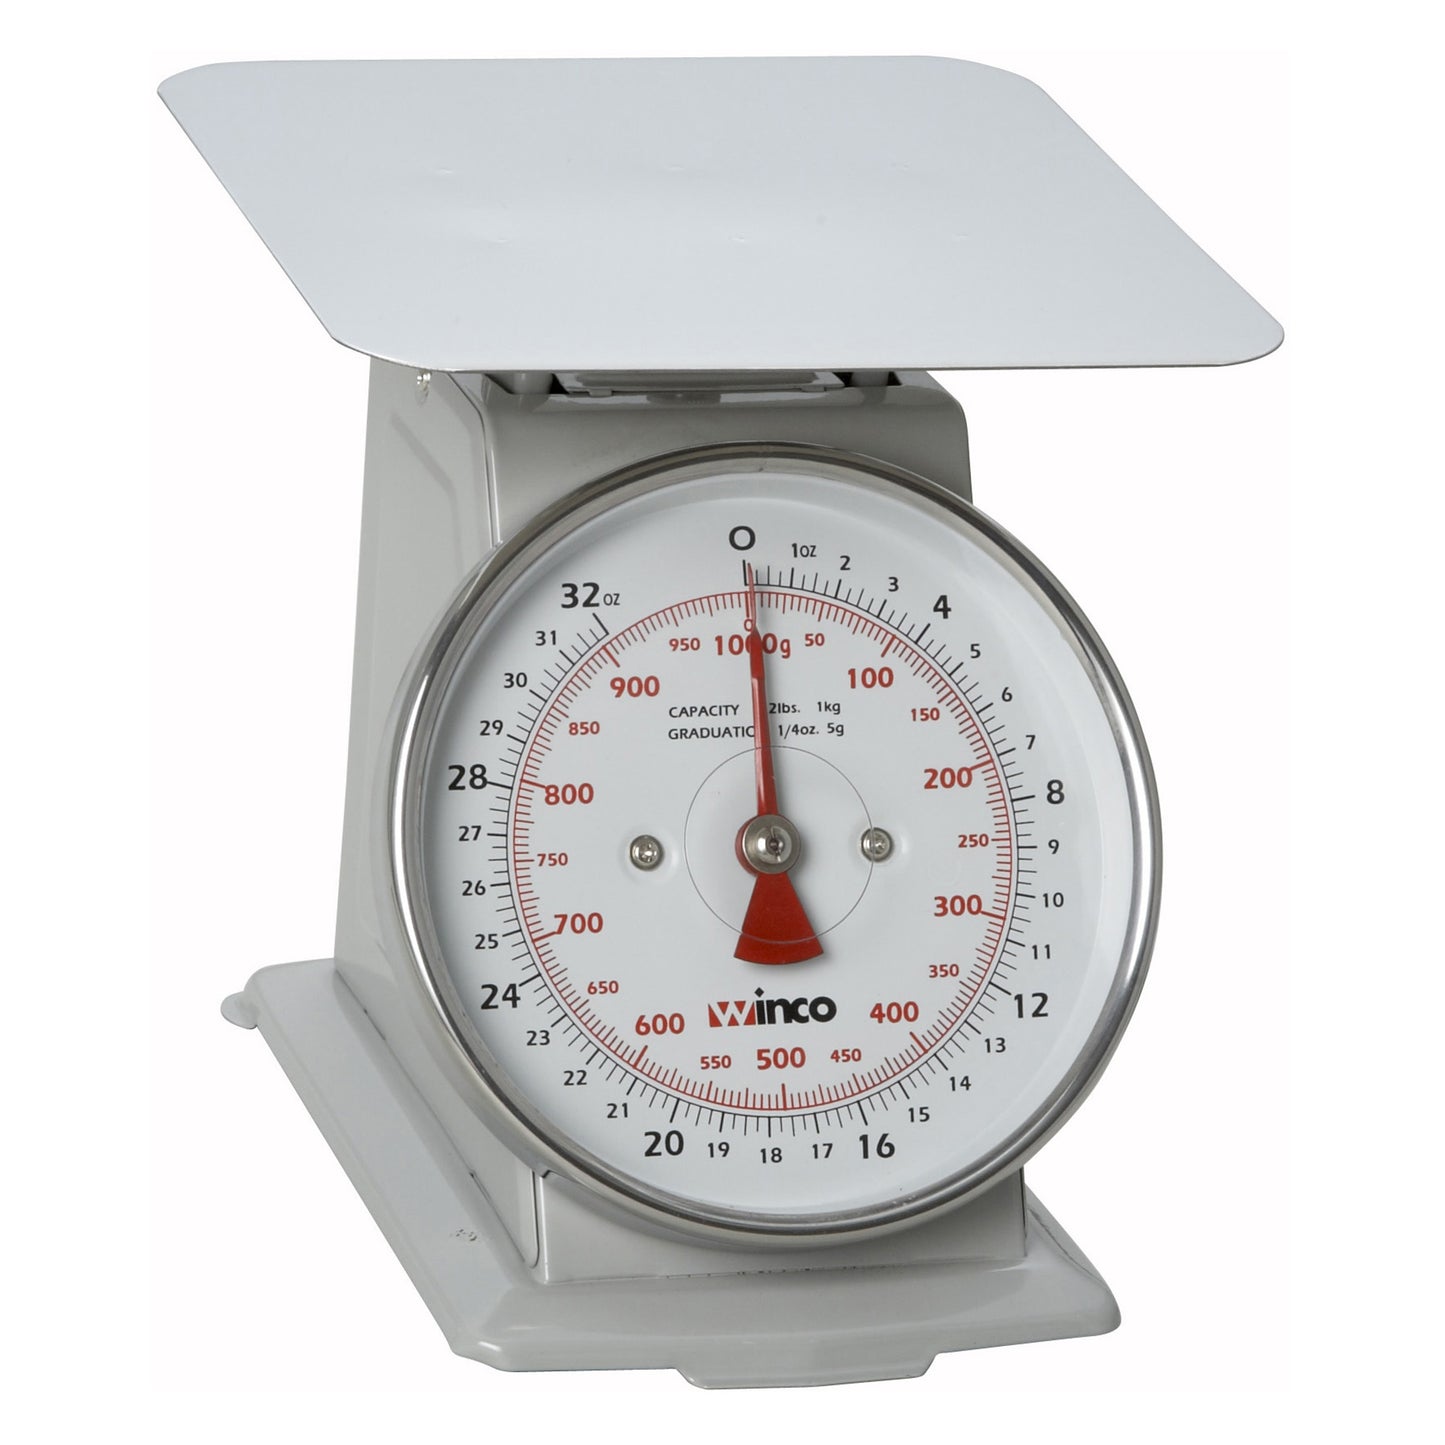 SCAL-62 - Receiving Scale - 2 lbs